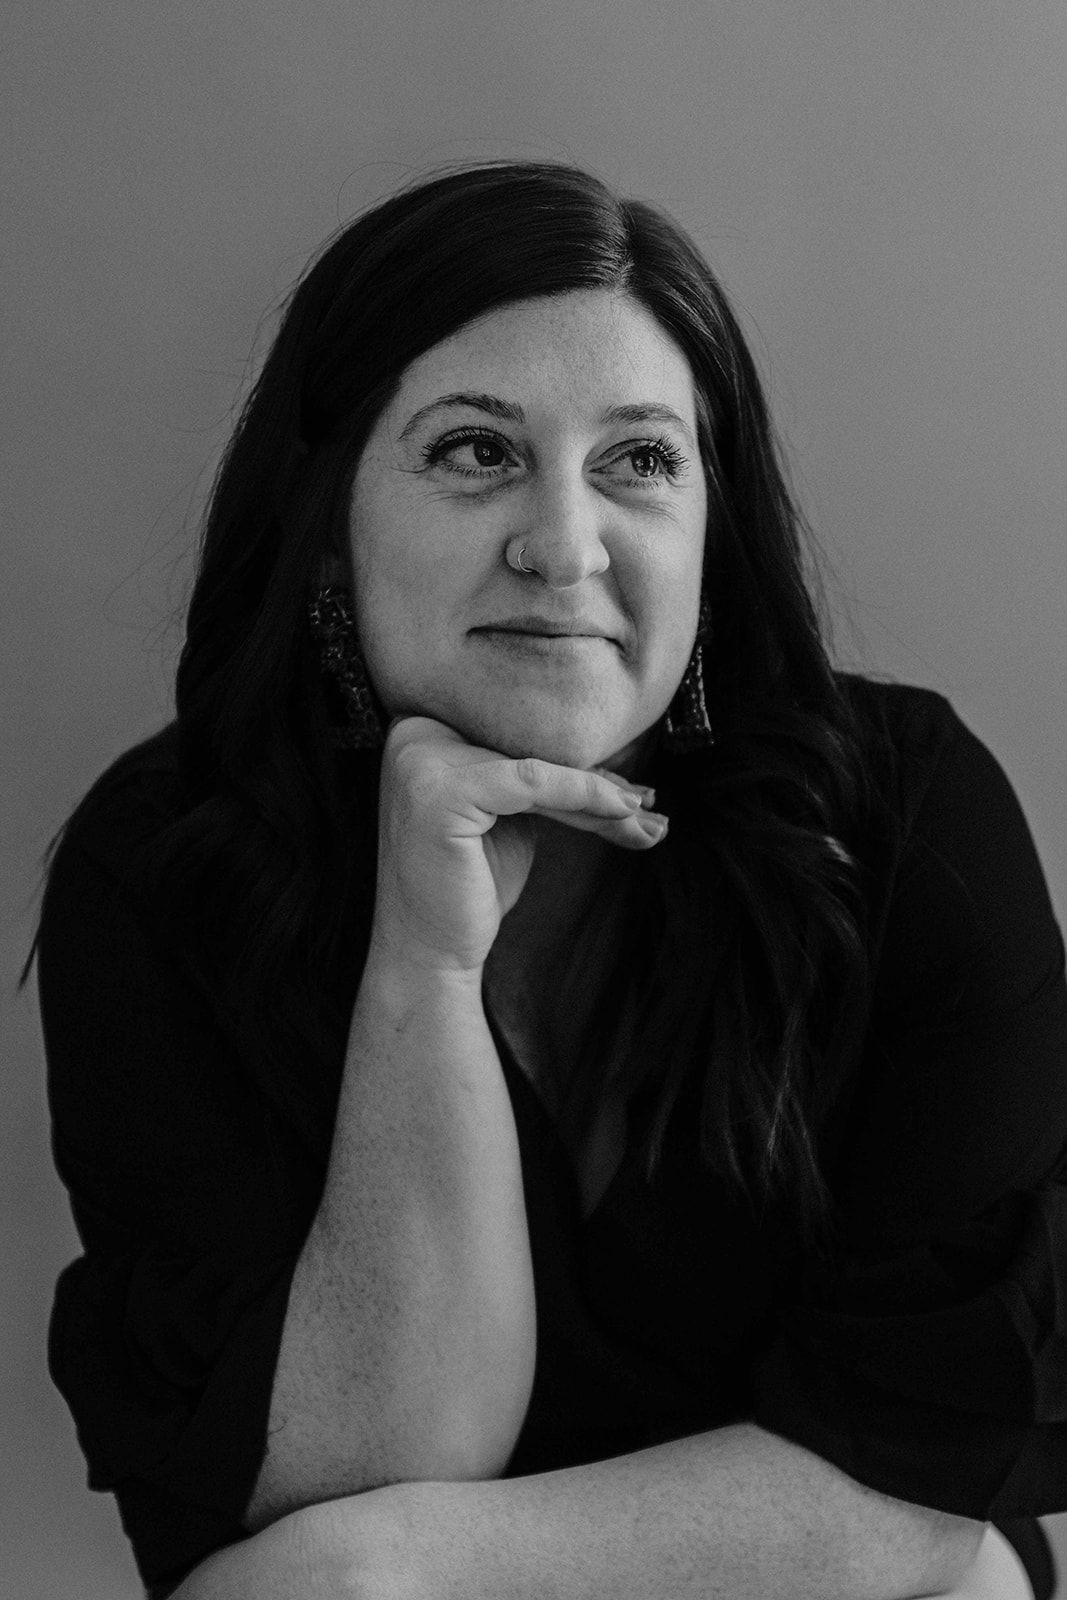 Black and white headshot of founder, Emilee Friedman Fechter, with chin resting on hand and looking off camera.